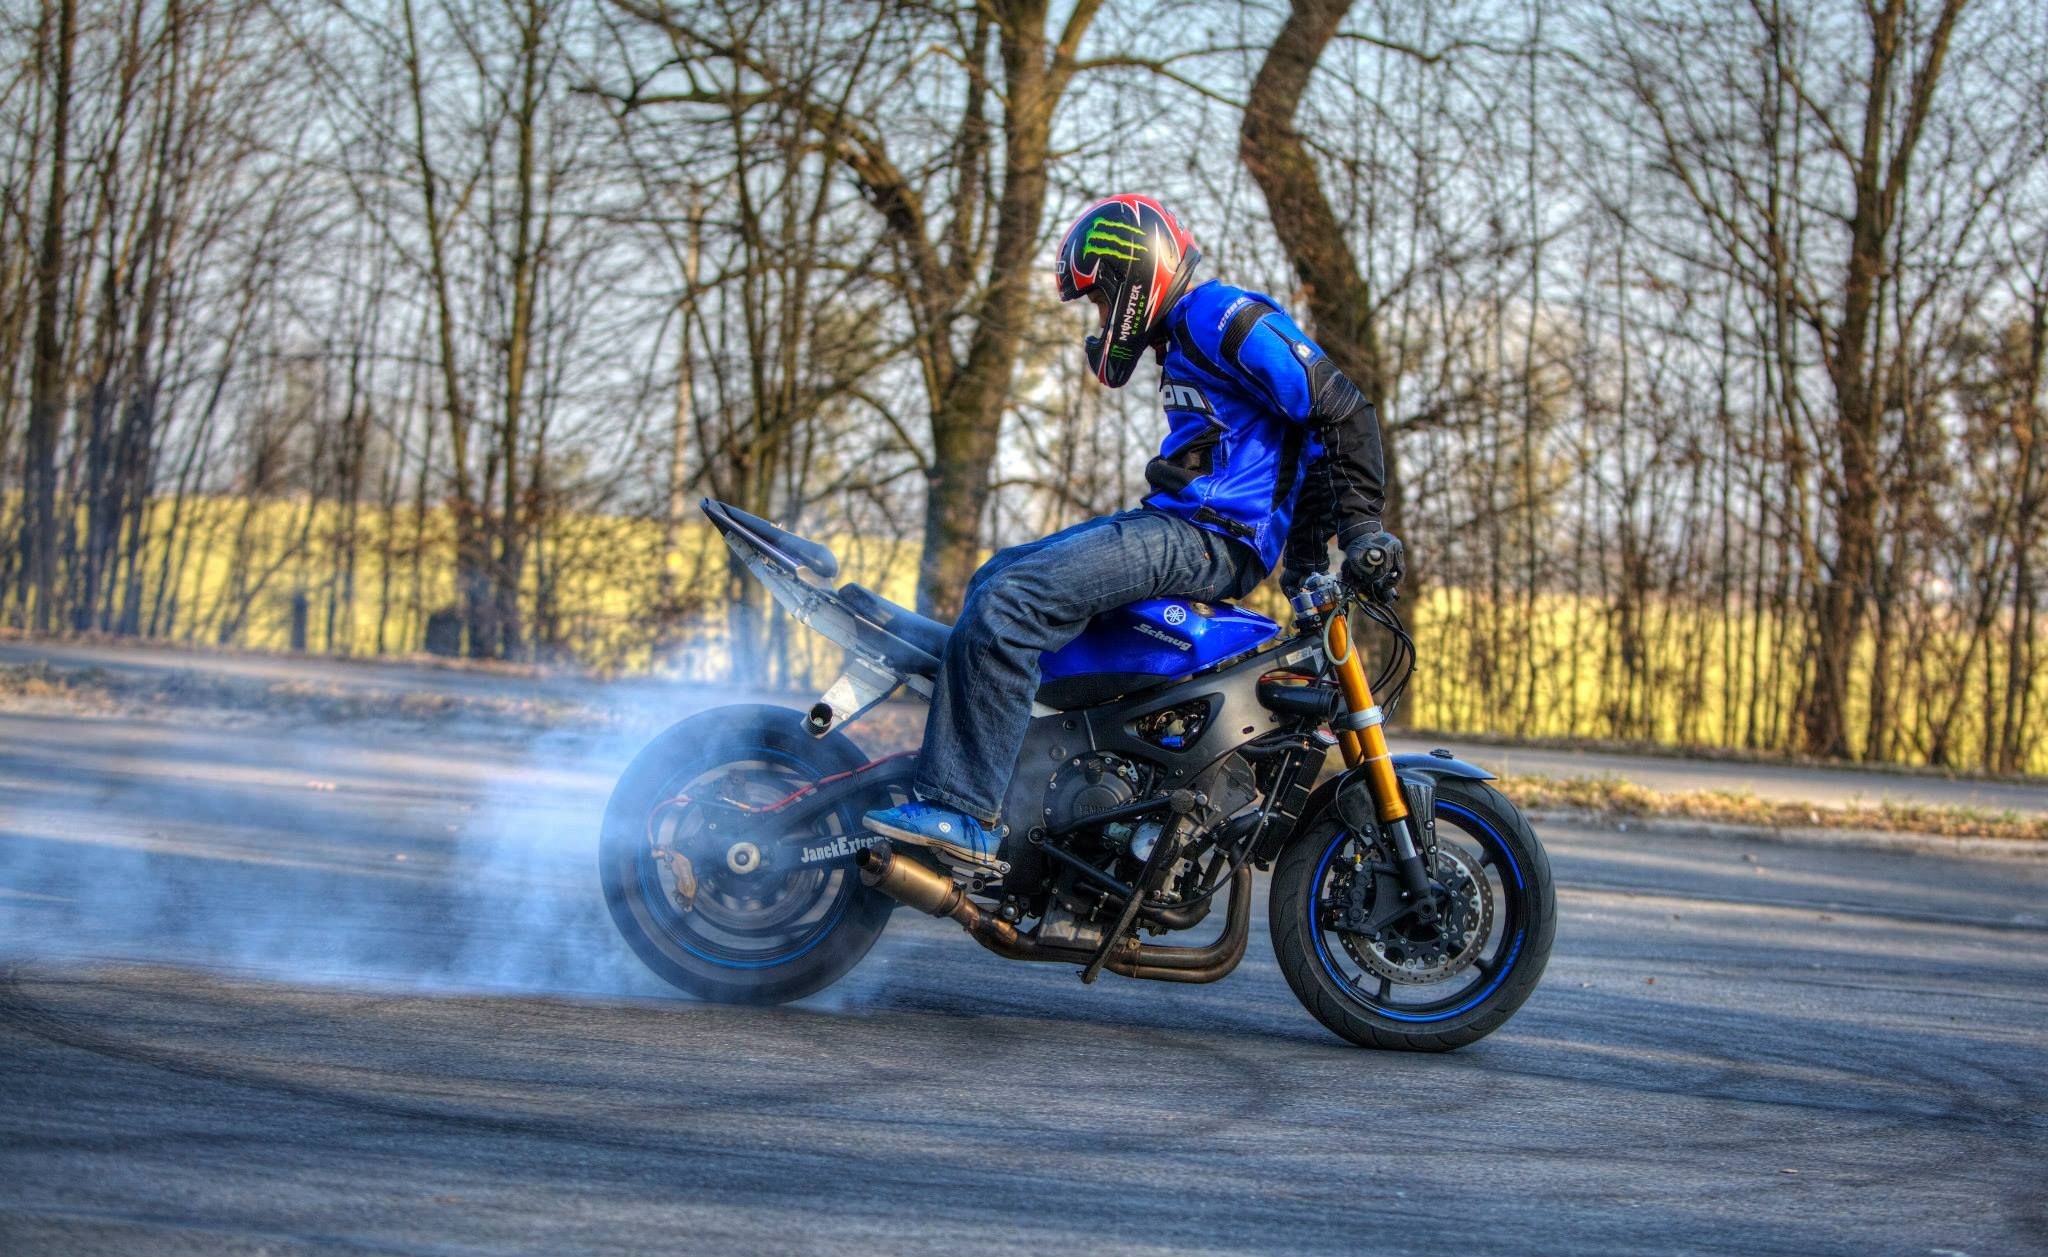 Stunt: Burnout by a stuntman doing switchback, Motorcycle stunting sport. 2050x1260 HD Background.